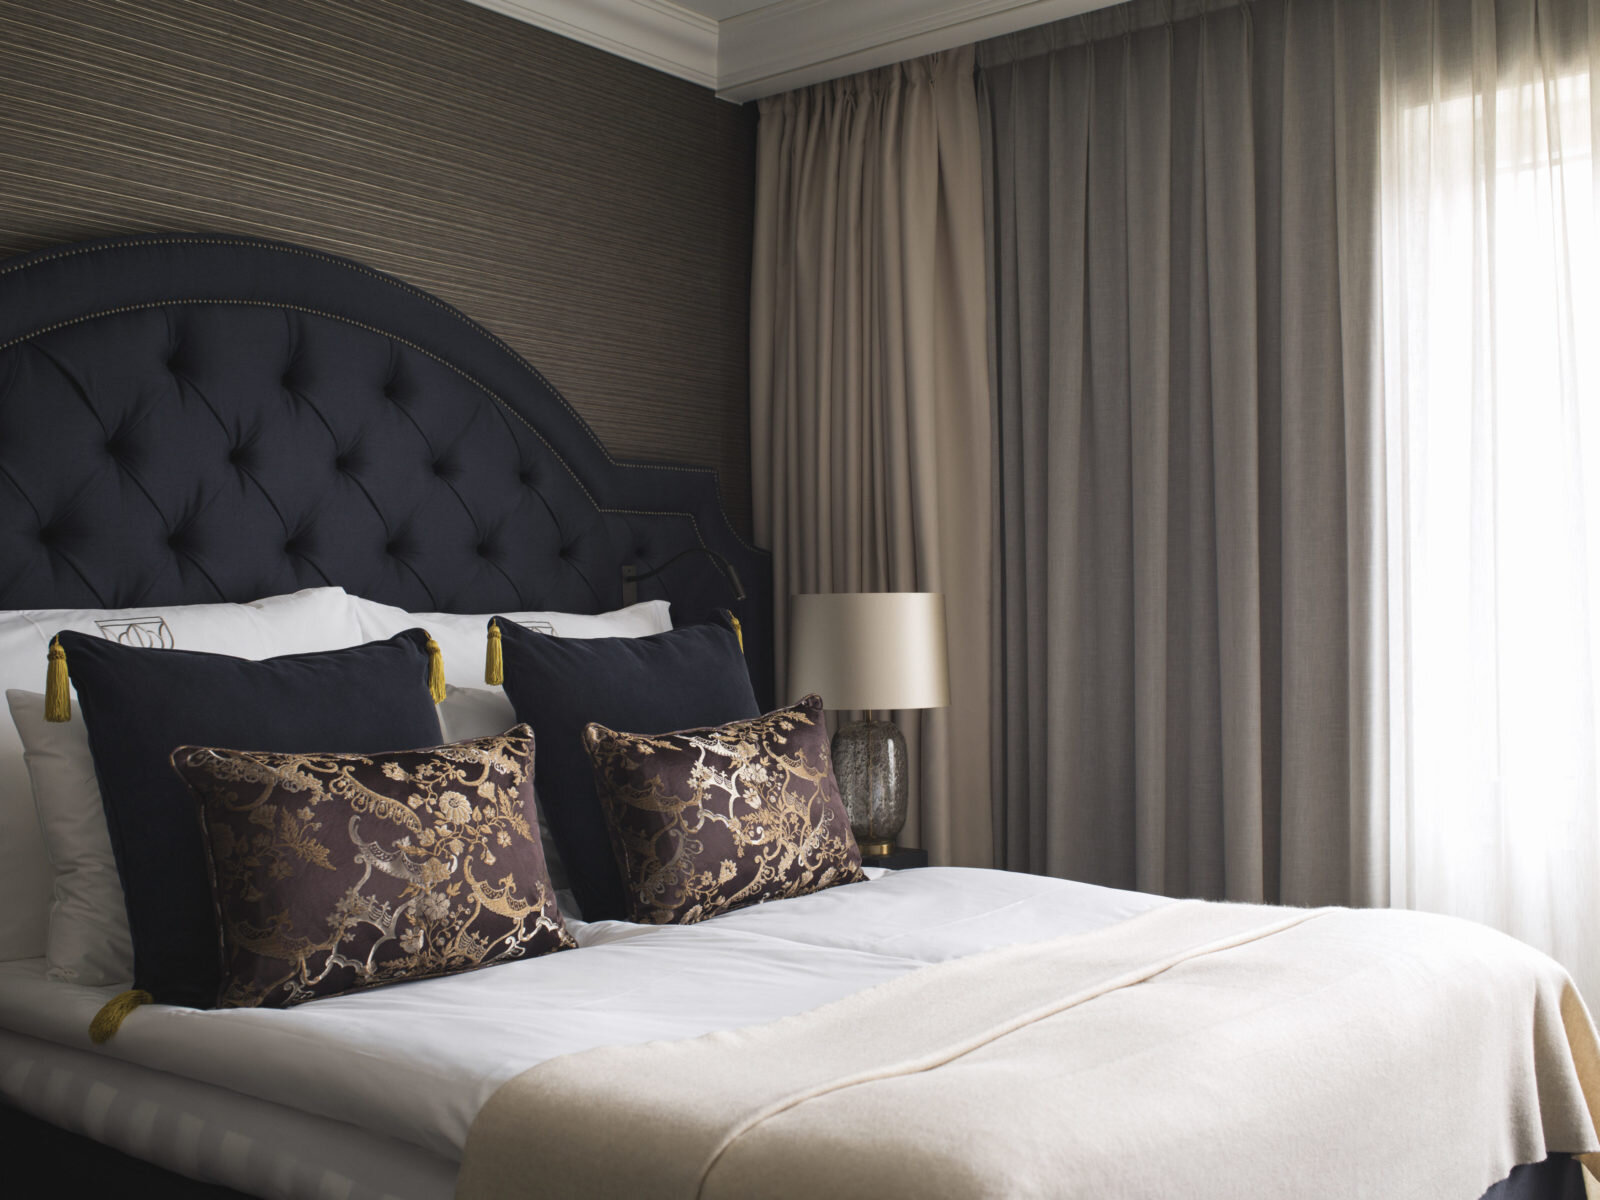 Executive and Deluxe Suite Offerings at the Brittania Hotel in Trondheim, Norway